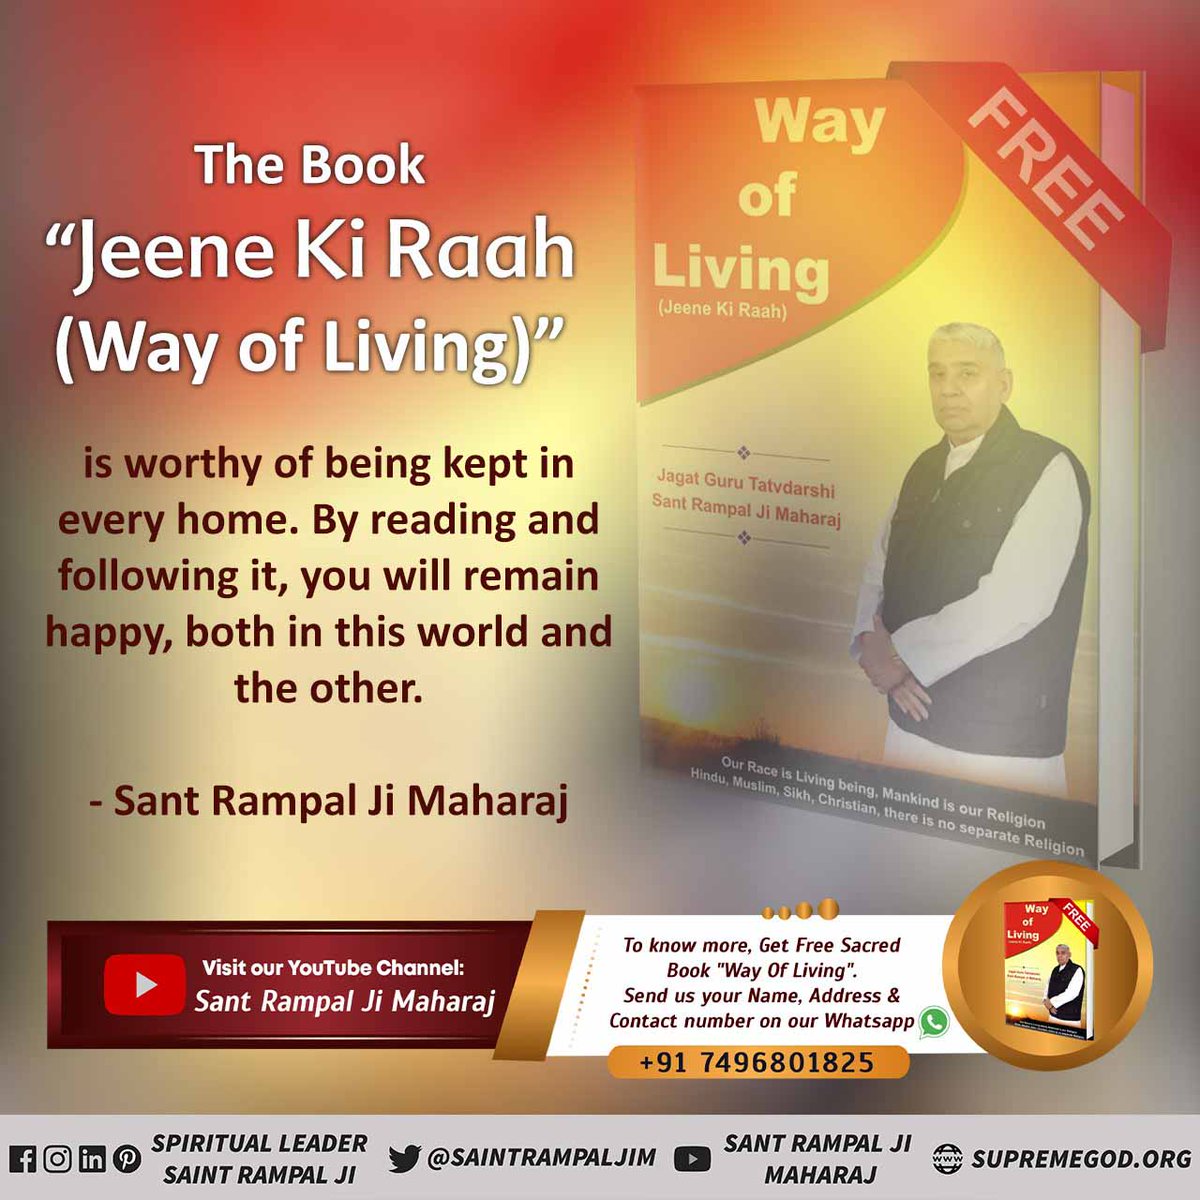 #SolutionForDepression The Book “Jeene Ki Raah (Way of Living)” is worthy of being kept in every home. By reading and following it, you will remain happy, both in this world and the other. - Spiritual Leader Sant Rampal Ji Maharaj